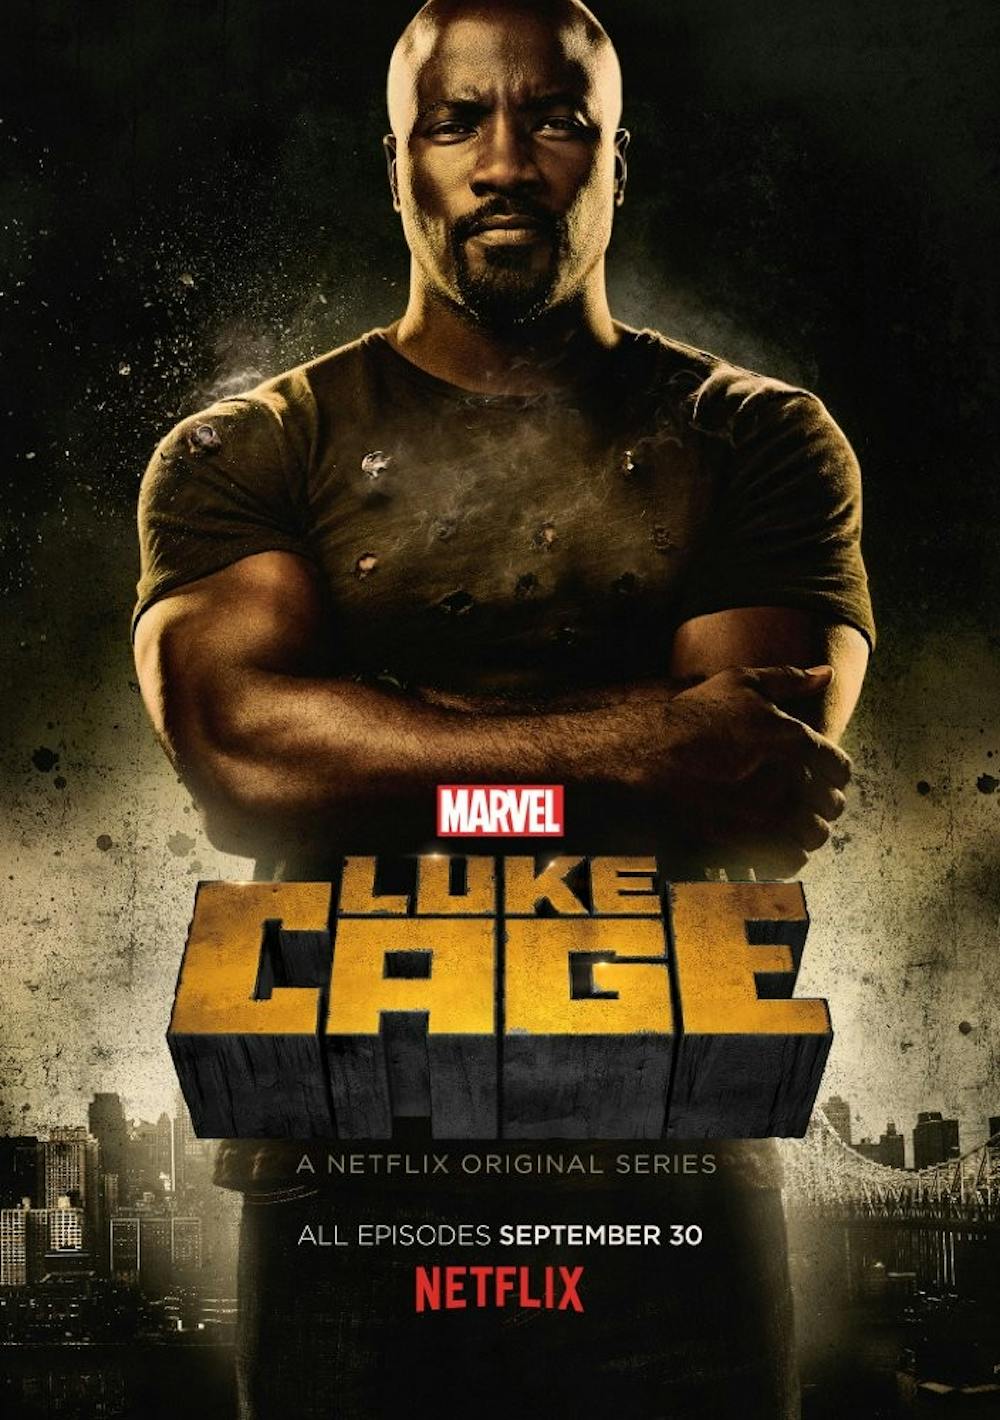 <p>Marvel’s latest show on Netflix, “Luke Cage,” continues the tradition of exploring a more grounded take on the Marvel Cinematic Universe.</p>